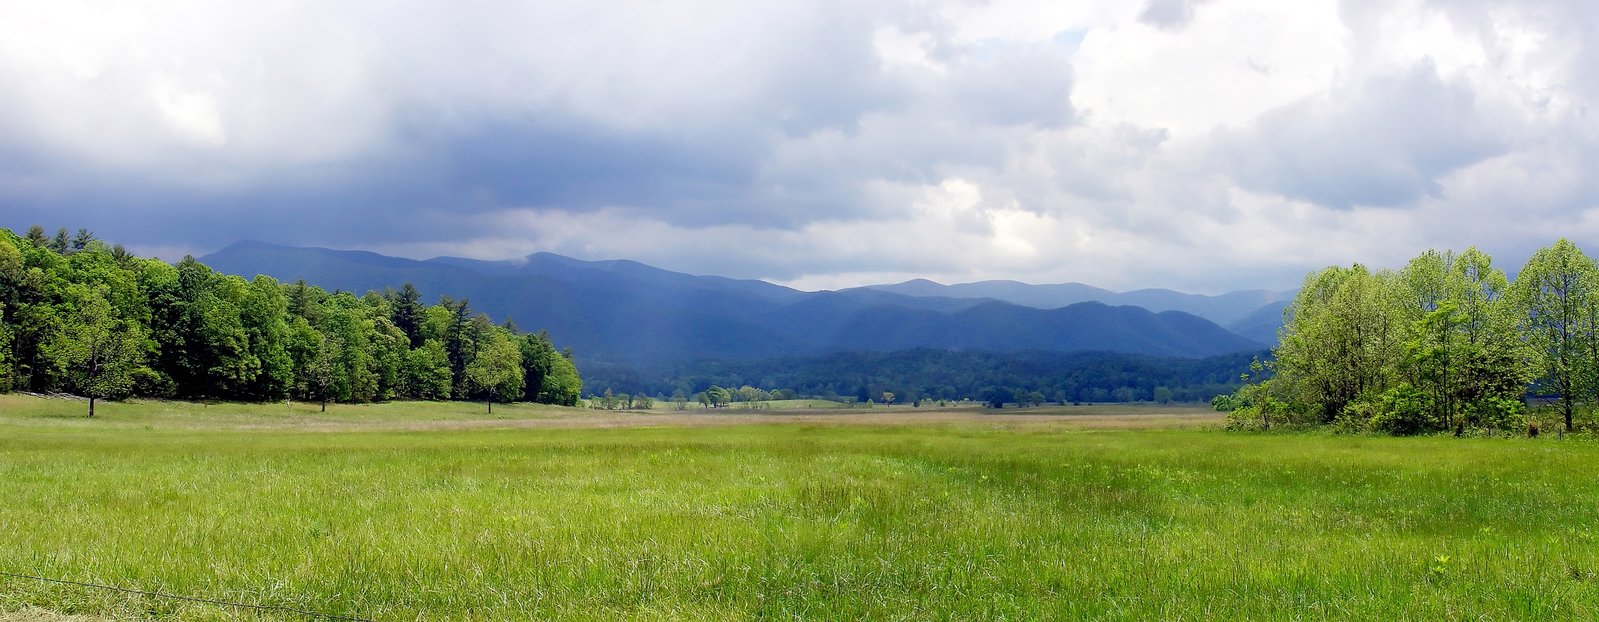 a field with green grass, a wooded area and mountains in the distance